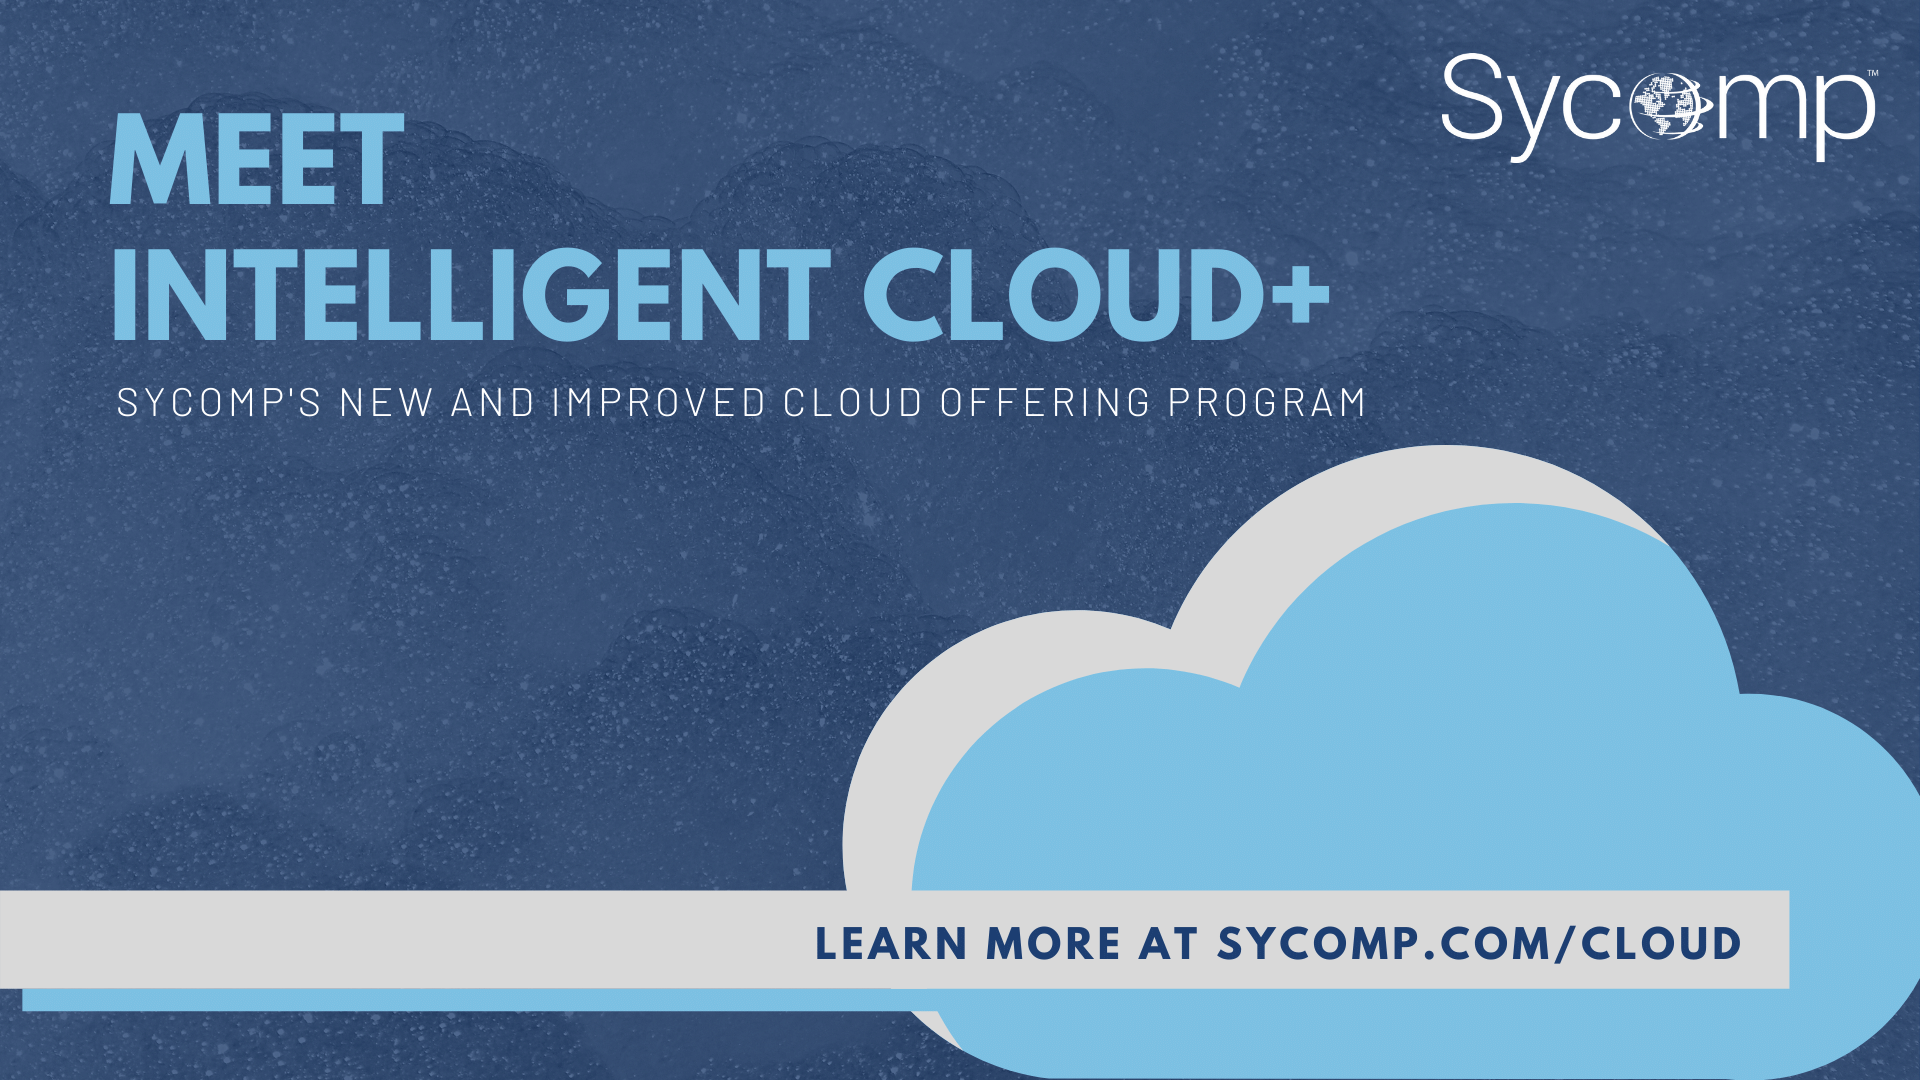 Intelligent Cloud Plus (Intelligent Cloud+), a new and improved Sycomp offering with a variety of benefits that enables organizations to consume the public cloud